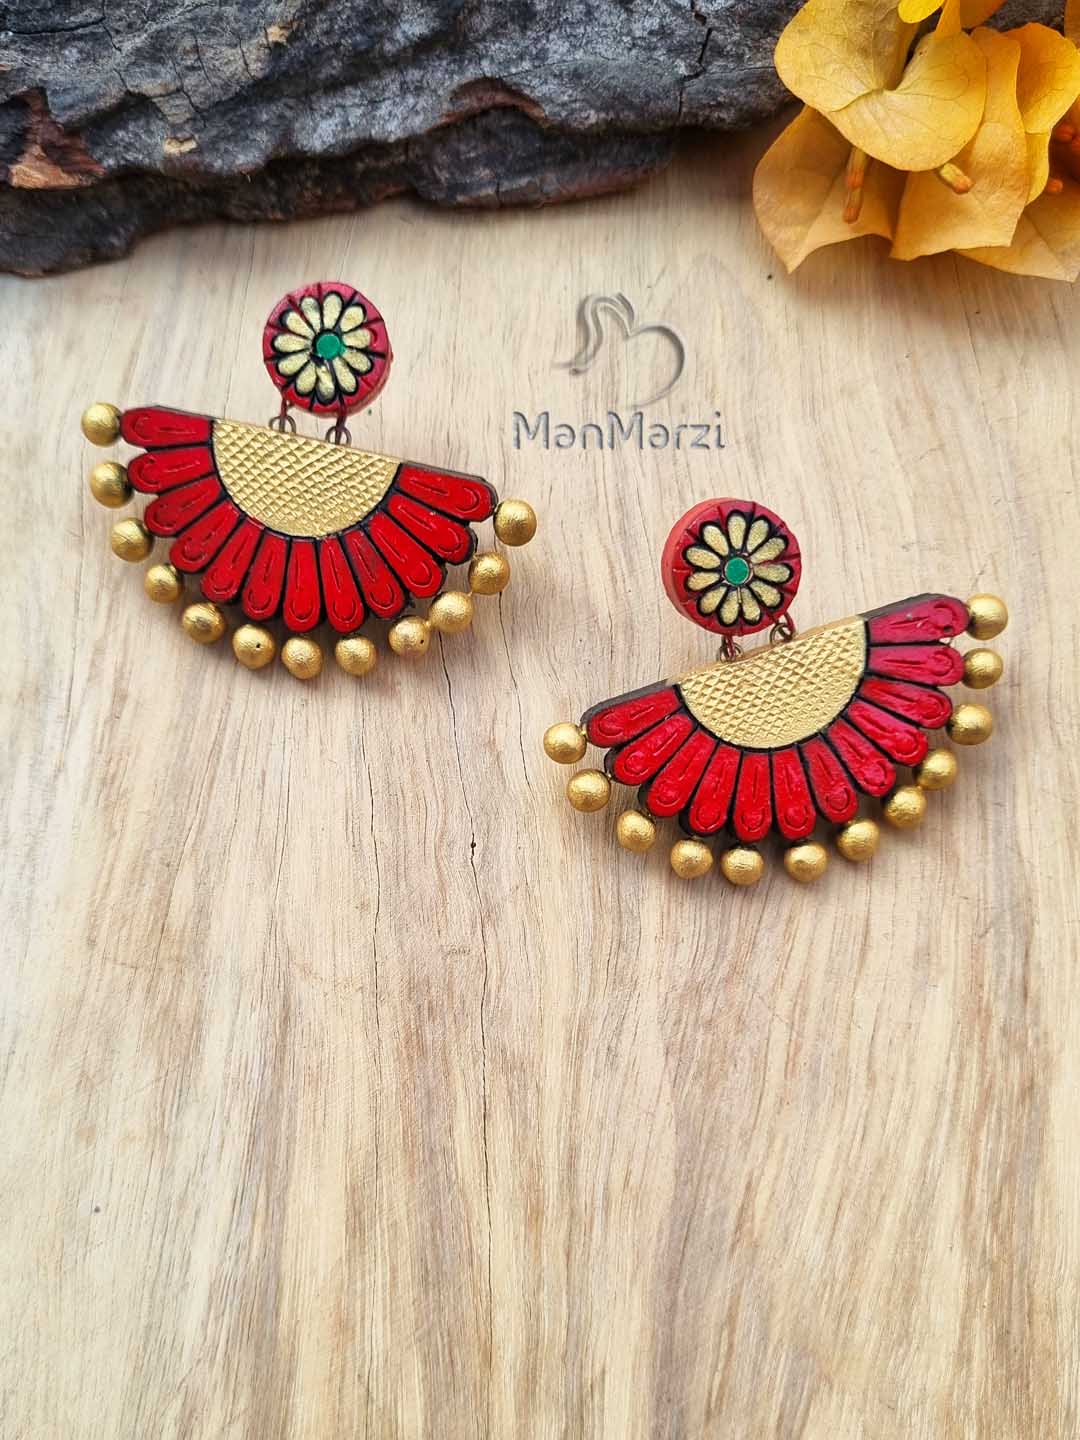 Shika creations terracotta jewellery - Terracotta Bali earrings ❤️  Handcrafted to perfection and ecofriendly😍 Can be customized in any colour  and design✨ WhatsApp to 9994355023 or dm for any queries 🥰 . . . . #